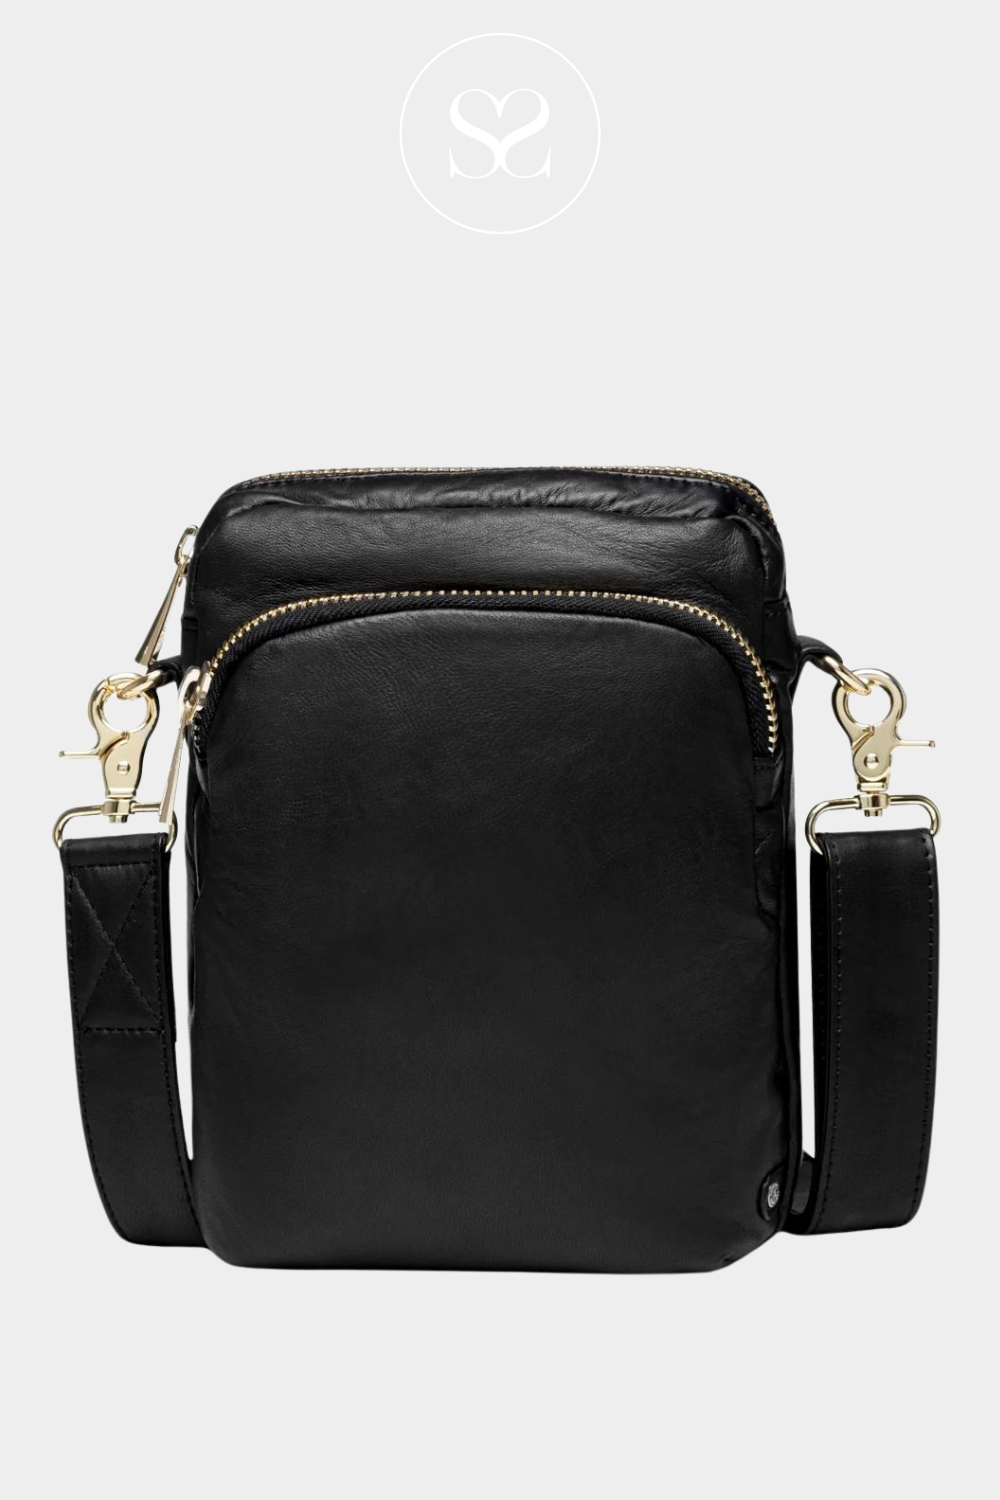 Small black crossbody bag with gold details from depeche